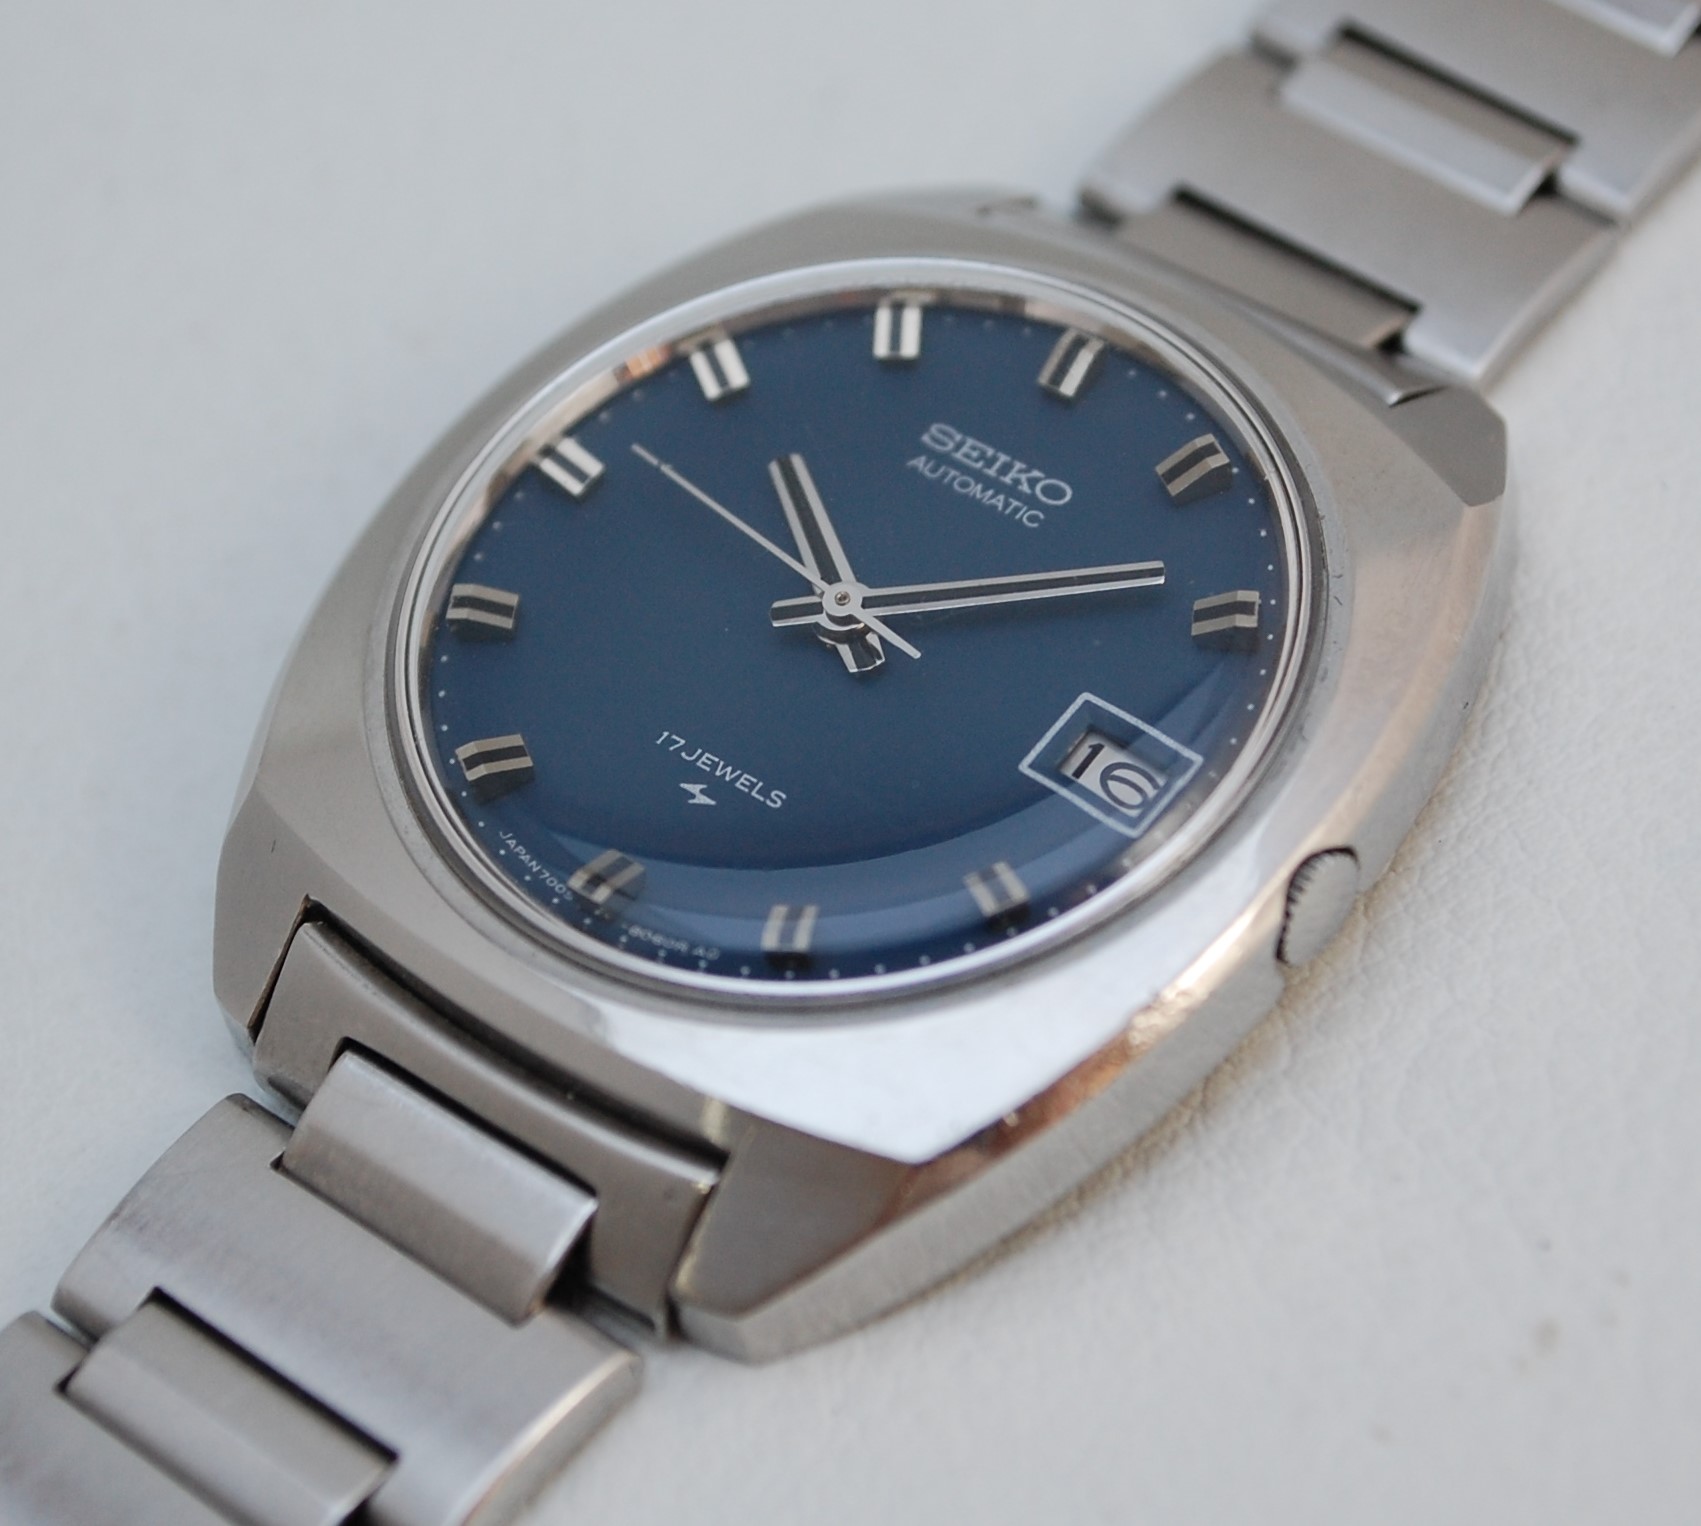 SOLD 1969 Seiko 7005-8040 Automatic - Birth Year Watches